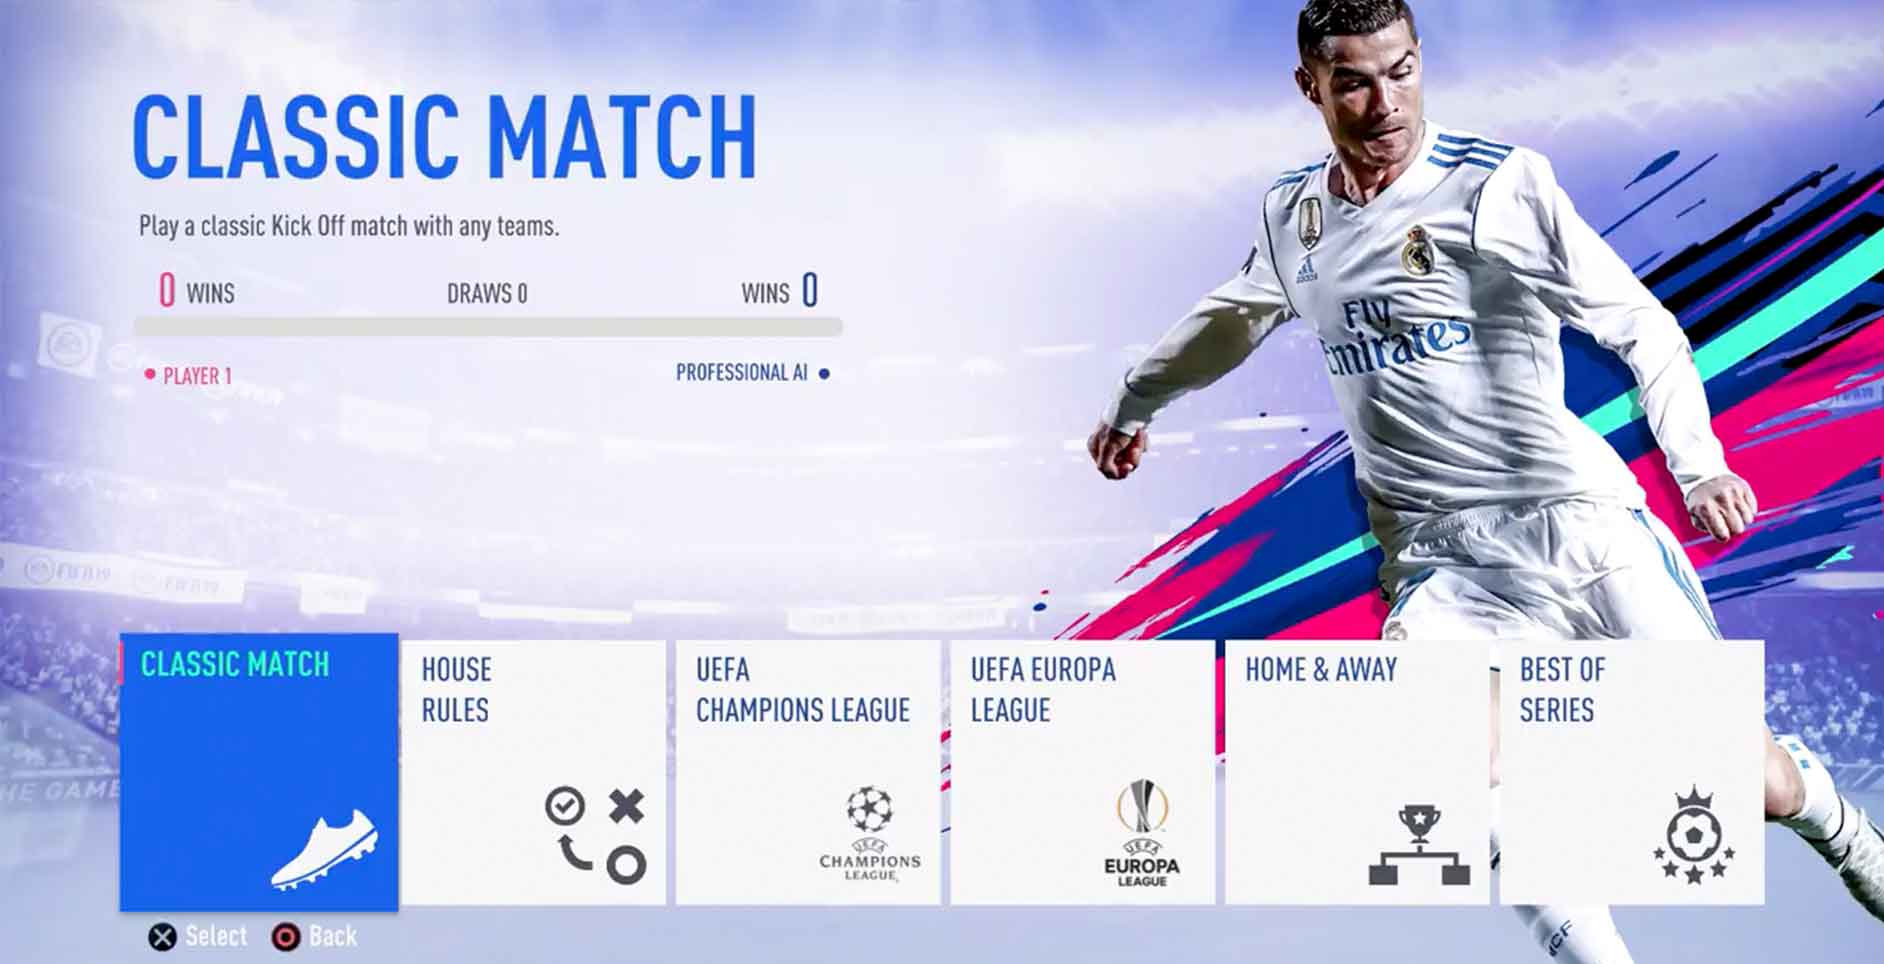 FIFA 19 Gameplay Footage Has Bizarrely Leaked Online